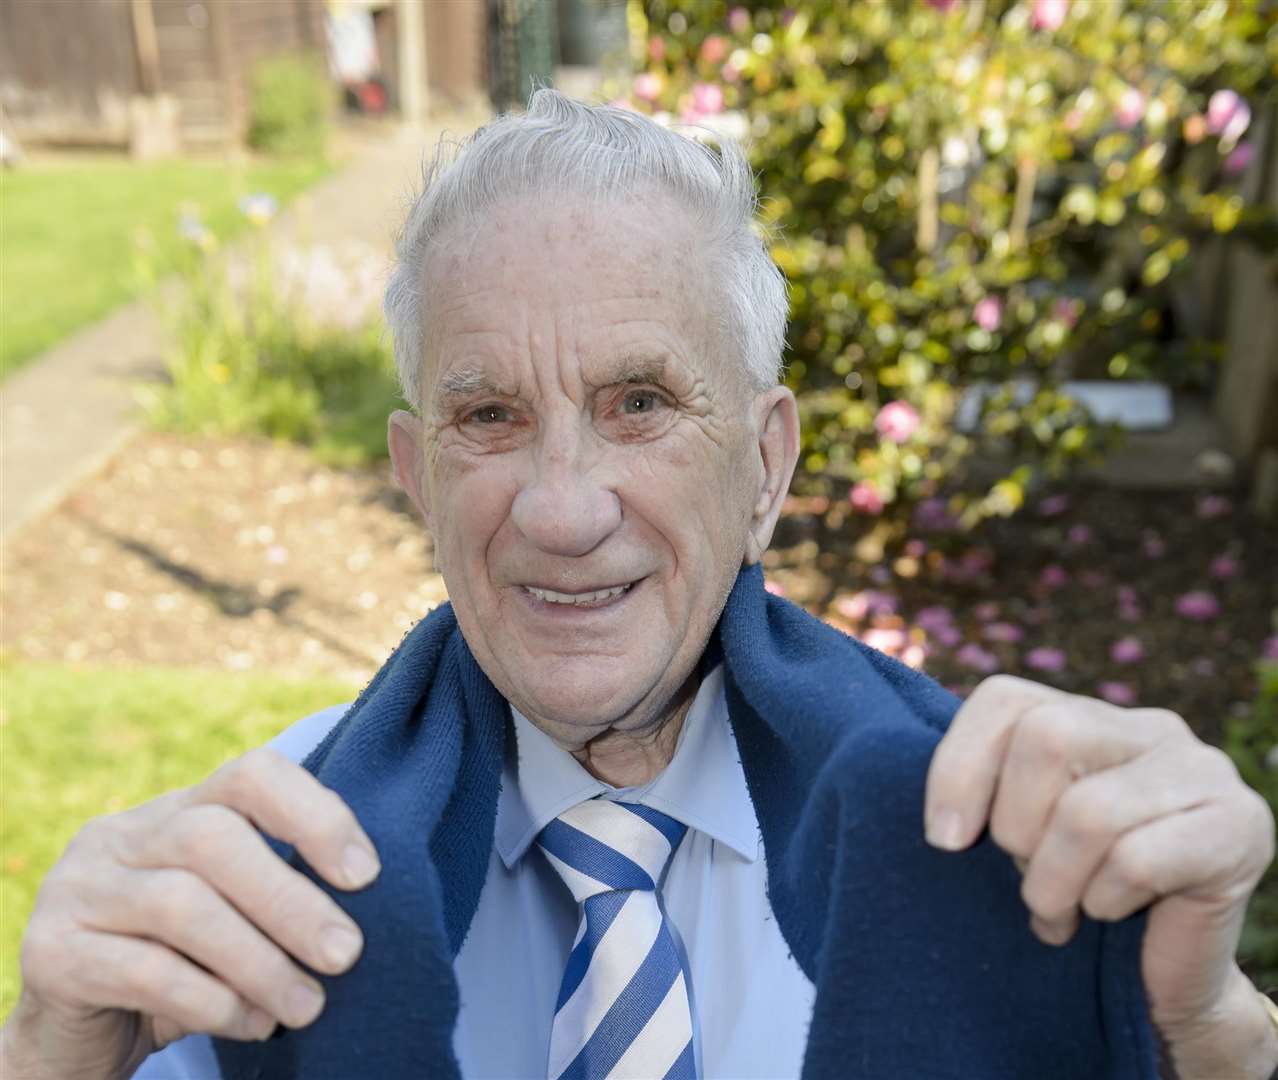 Eric started as a steward at Gillingham FC when he was 16. He is now 87